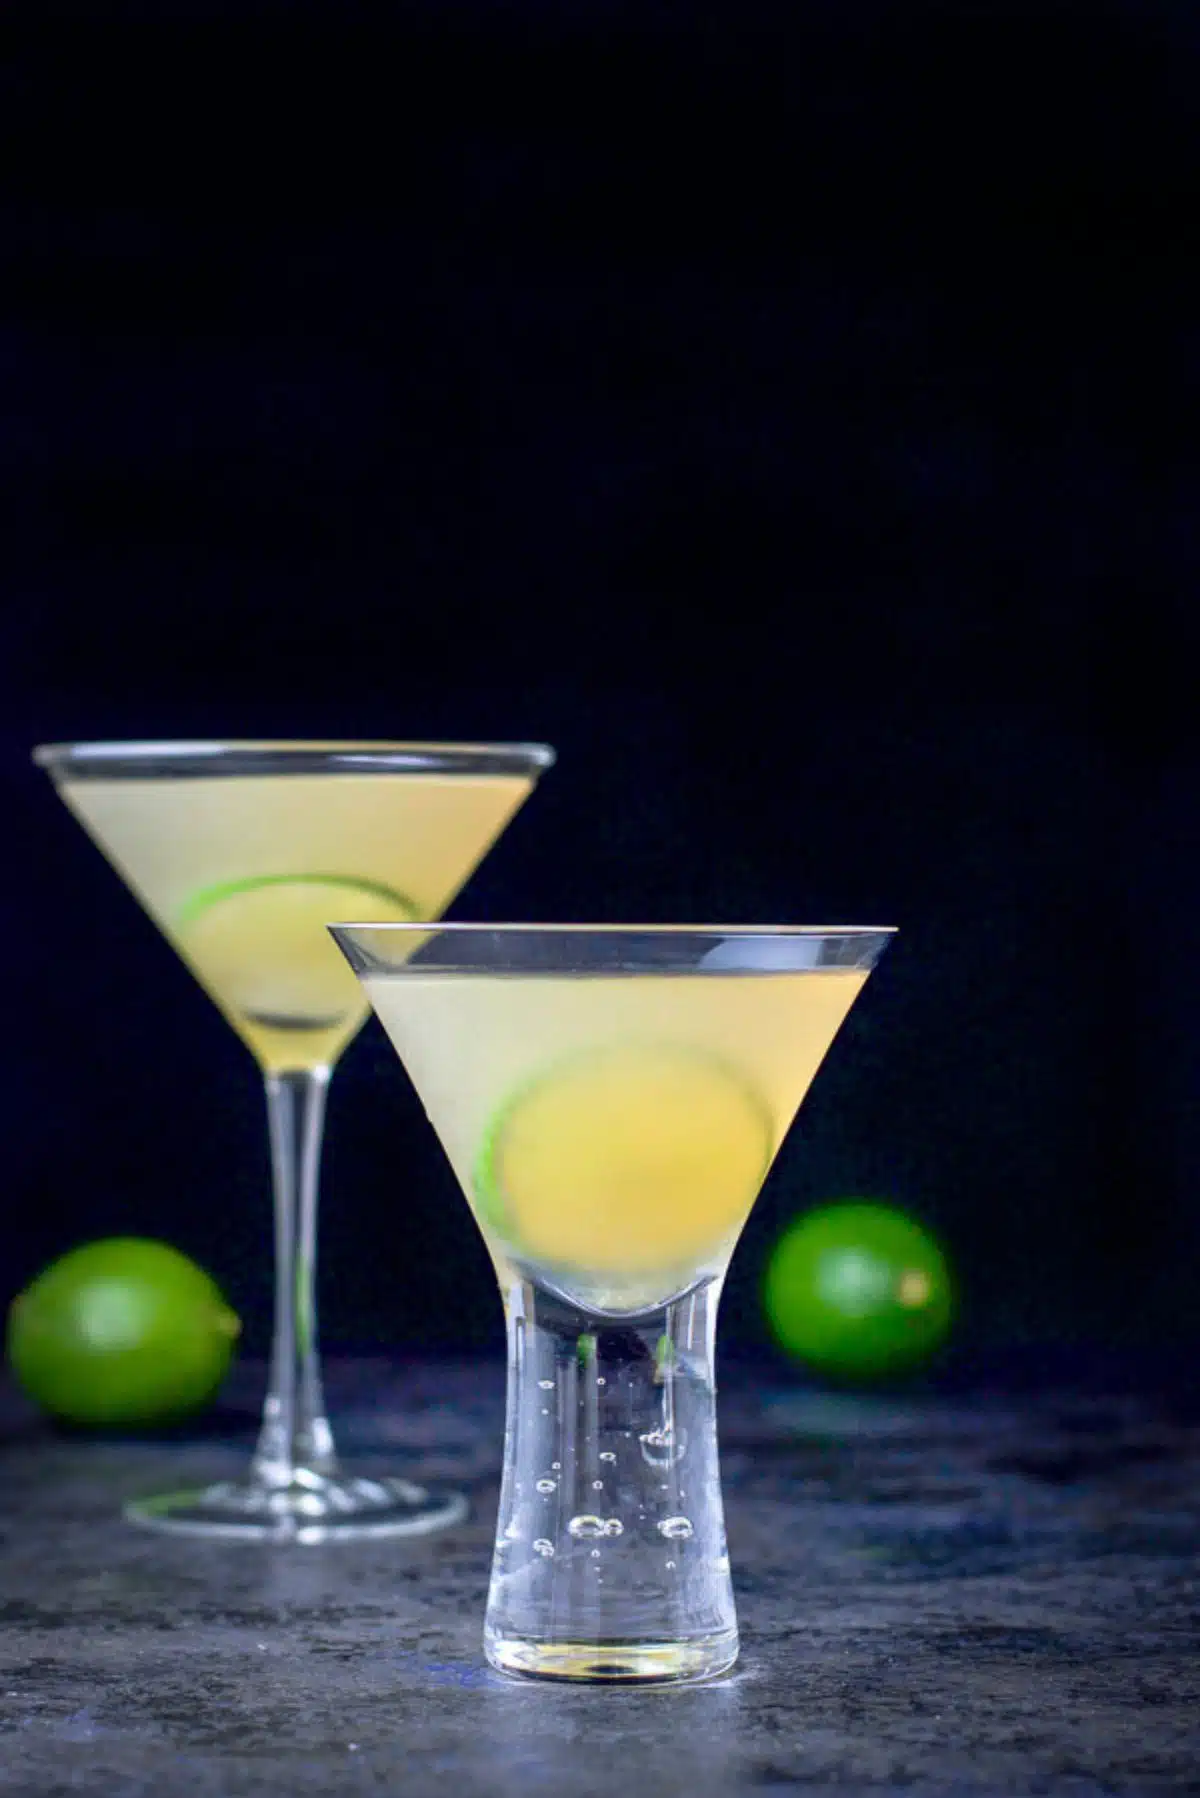 vertical view of the bubble martini glass in front of the classic glass with a few limes in back